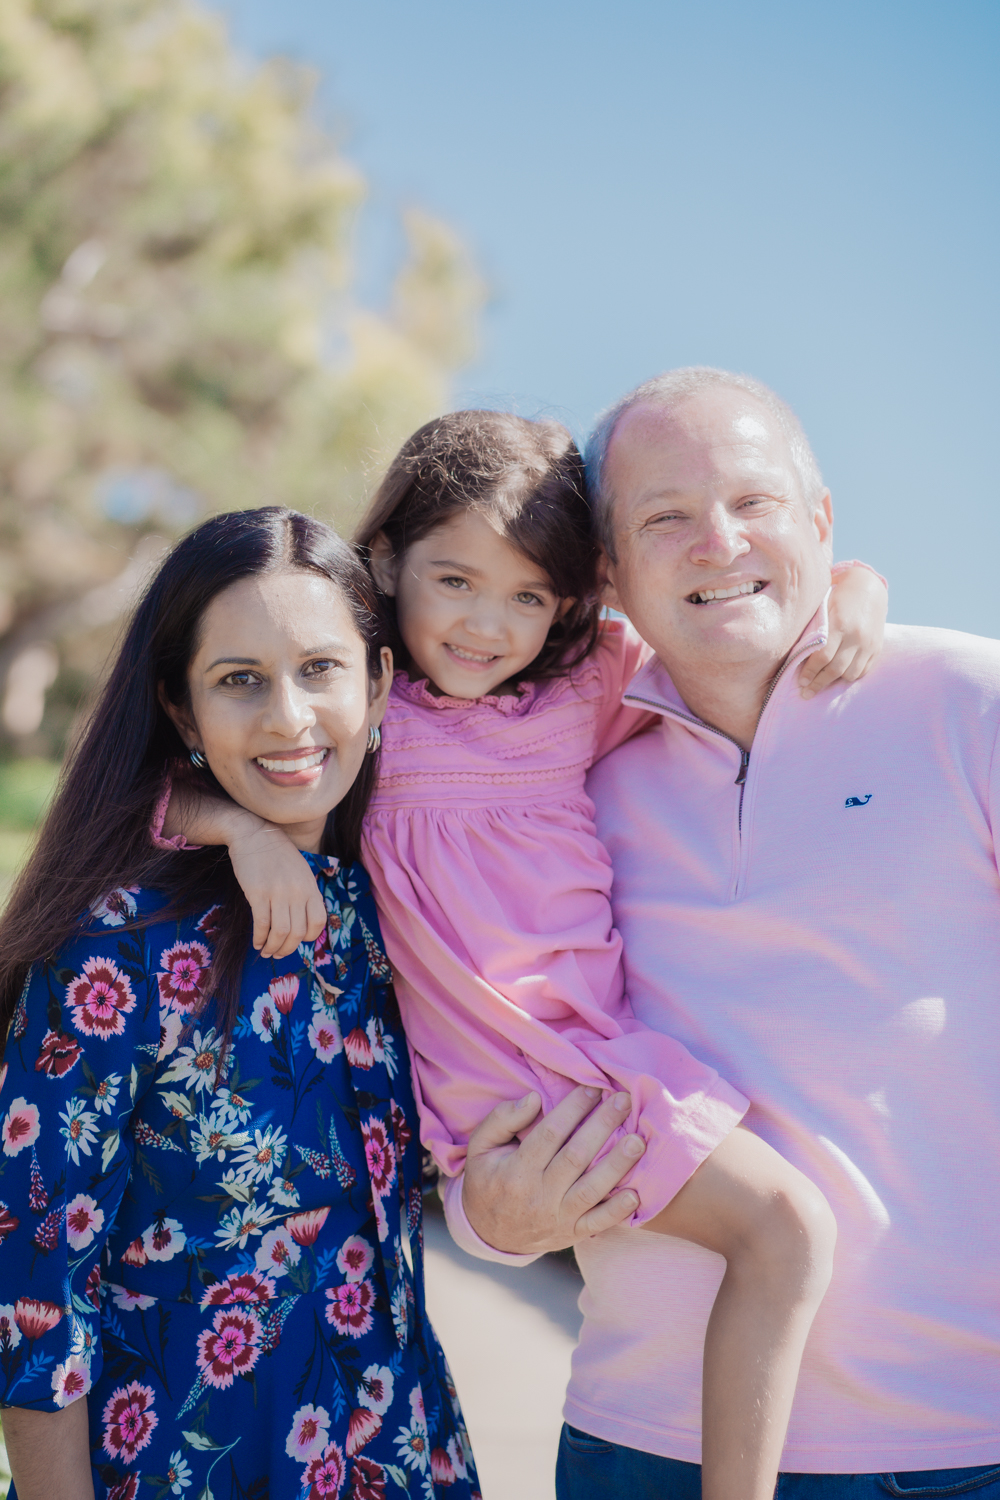 Family Session, Wedding Anniversary, and Birthday Photo Session at Pelican Hill Resport in Newport Beach, Orange County, California